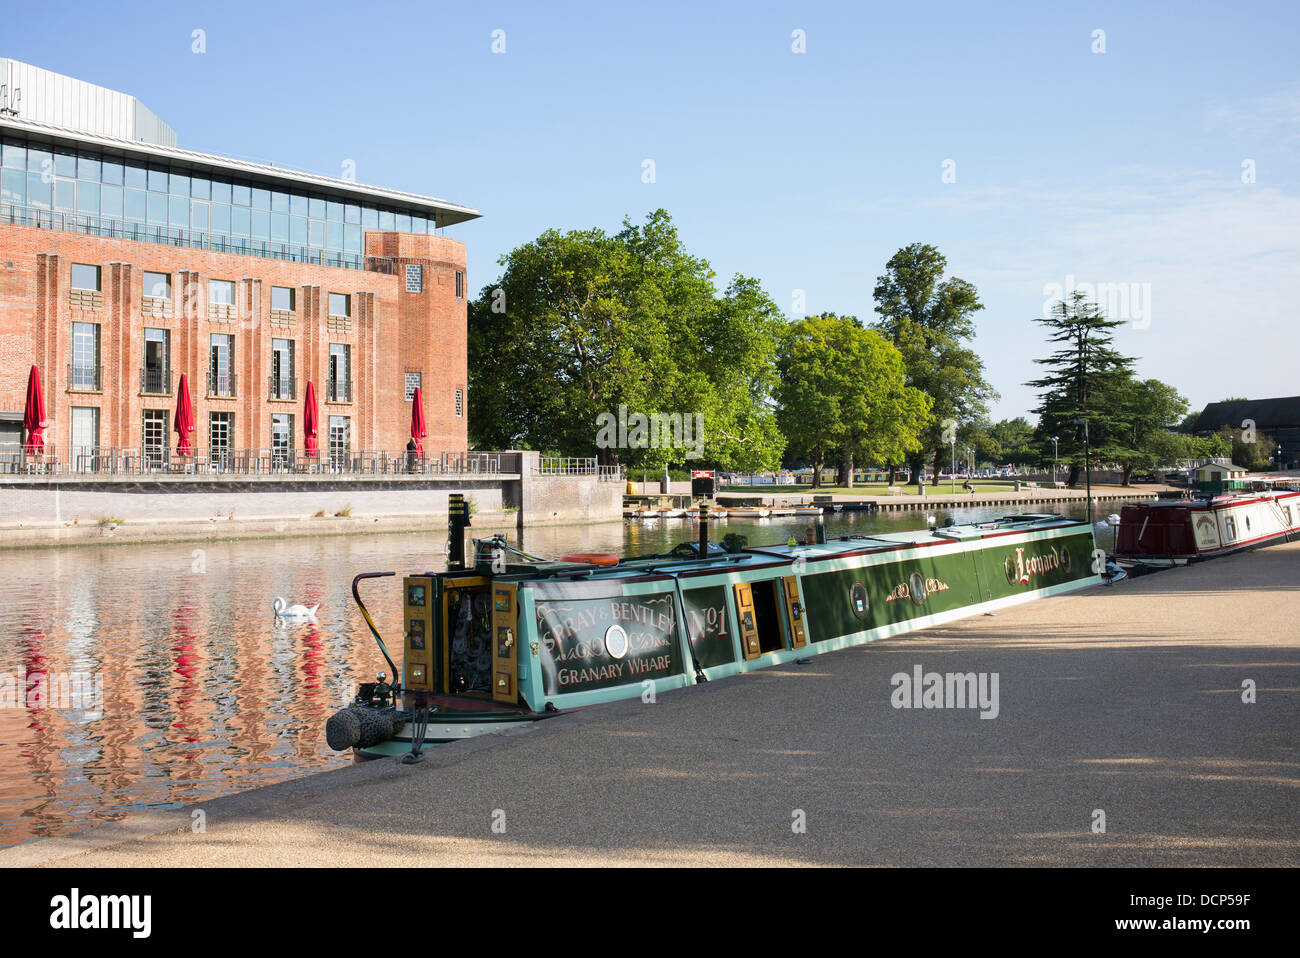 Canal boat on the river Avon opposite The RSC theatre, Waterside, Stratford upon Avon, Warwickshire, England Stock Photo